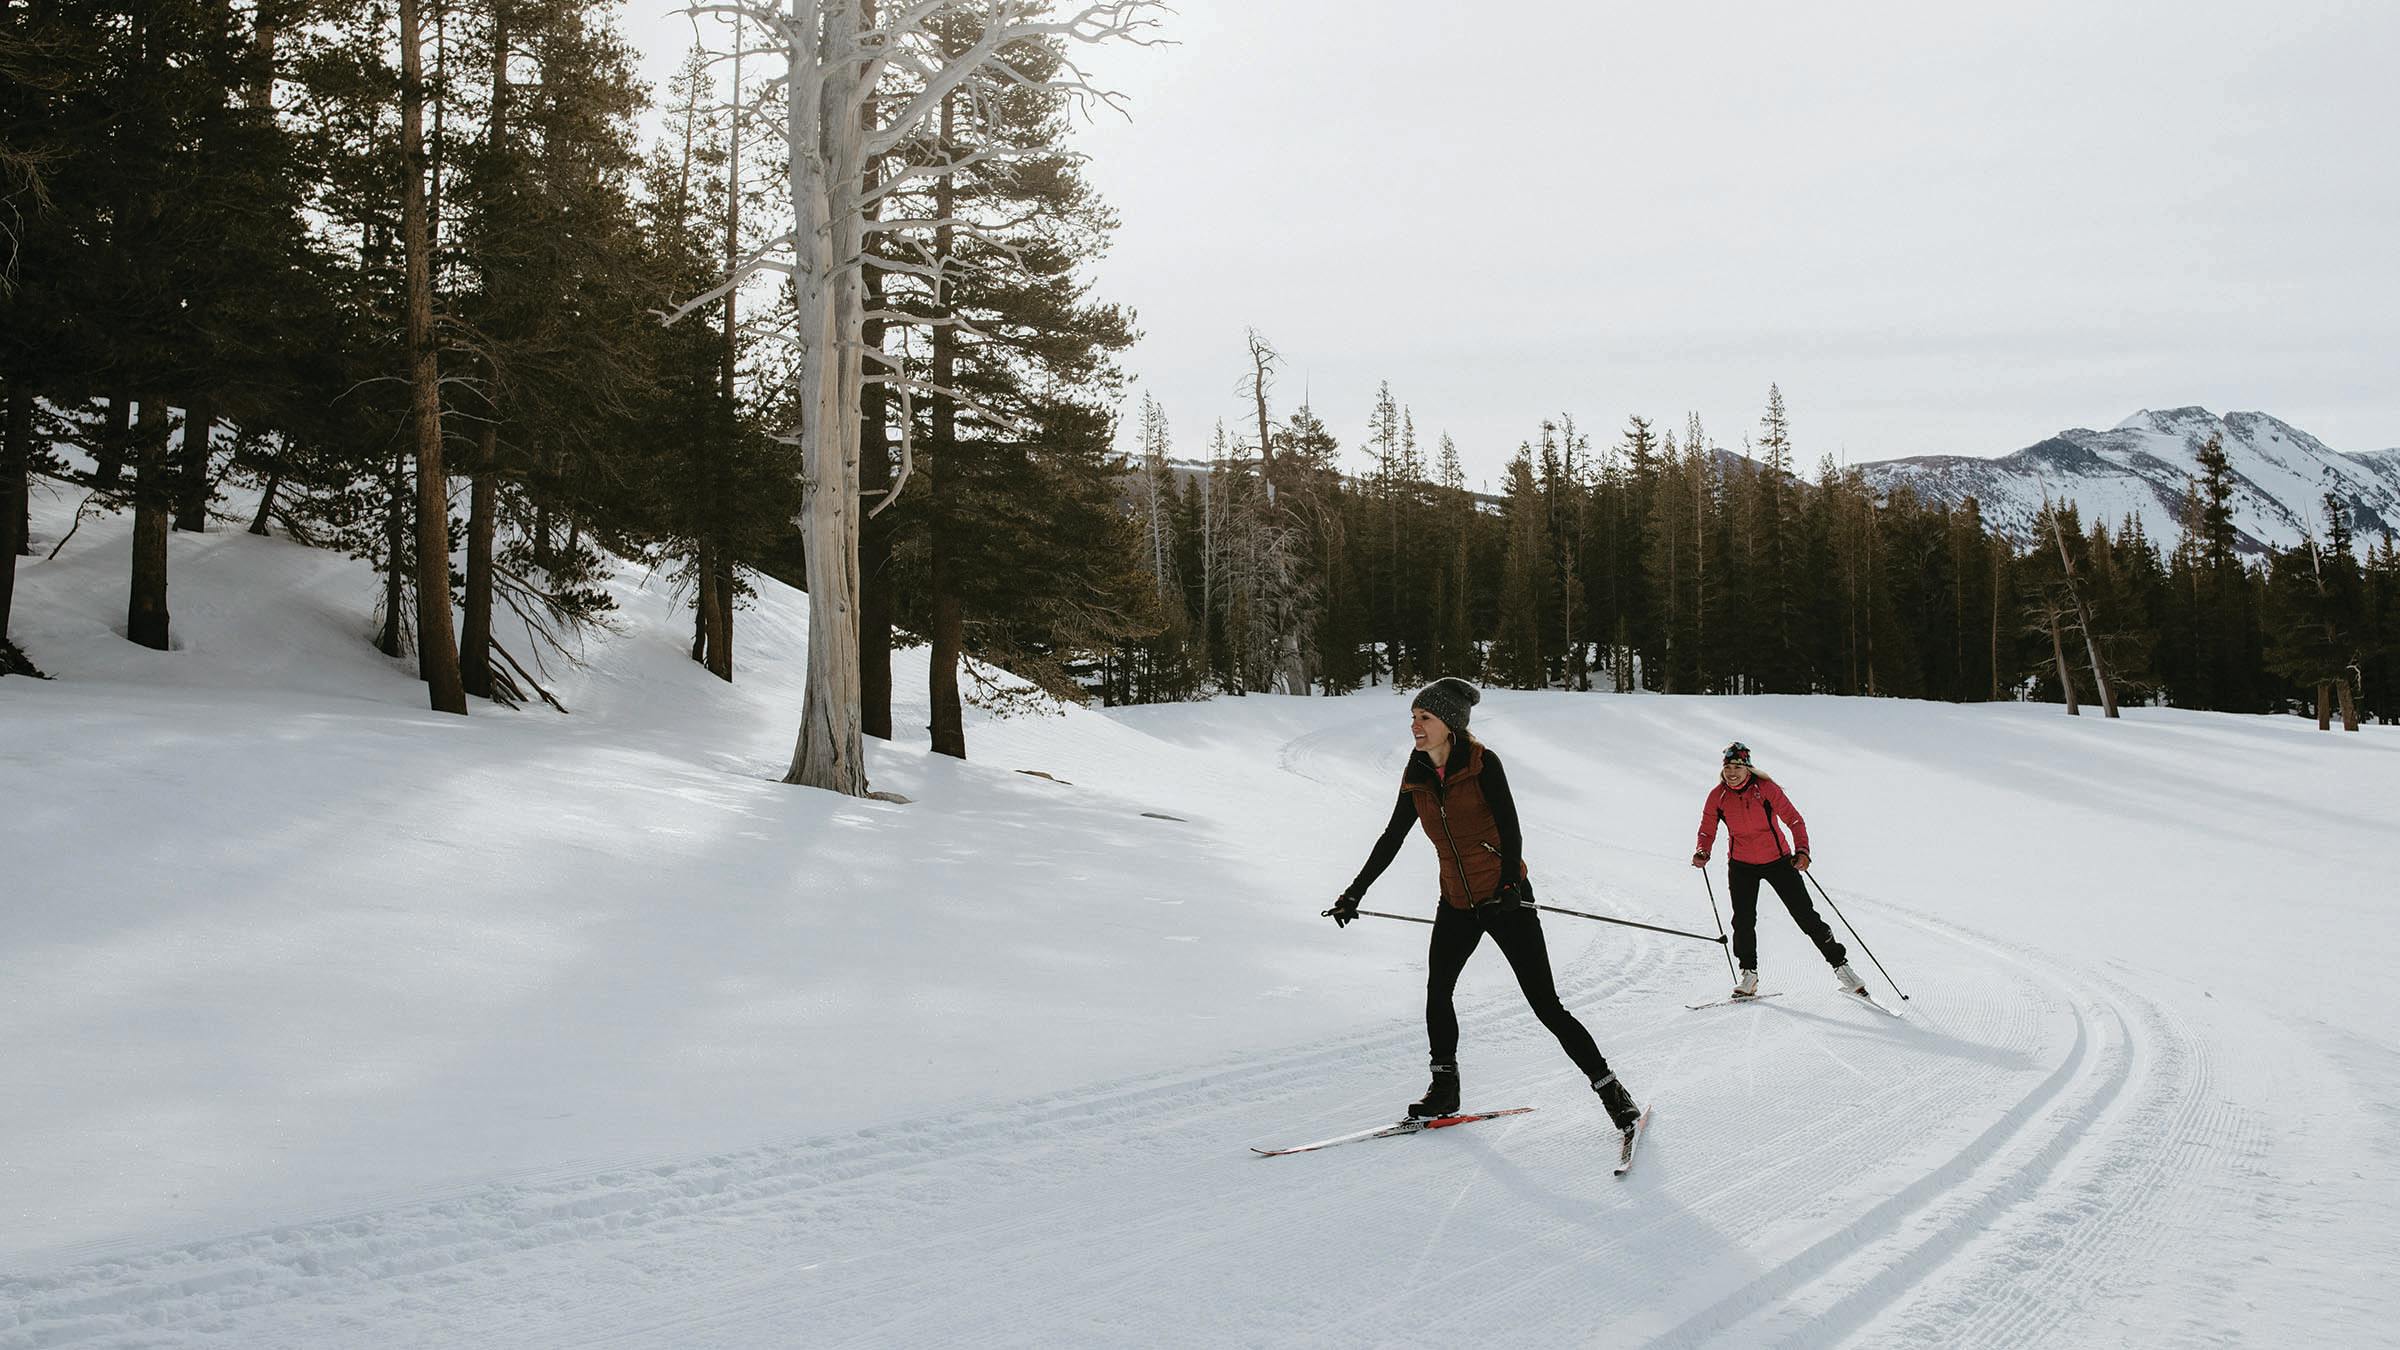 Two cross-country skiers